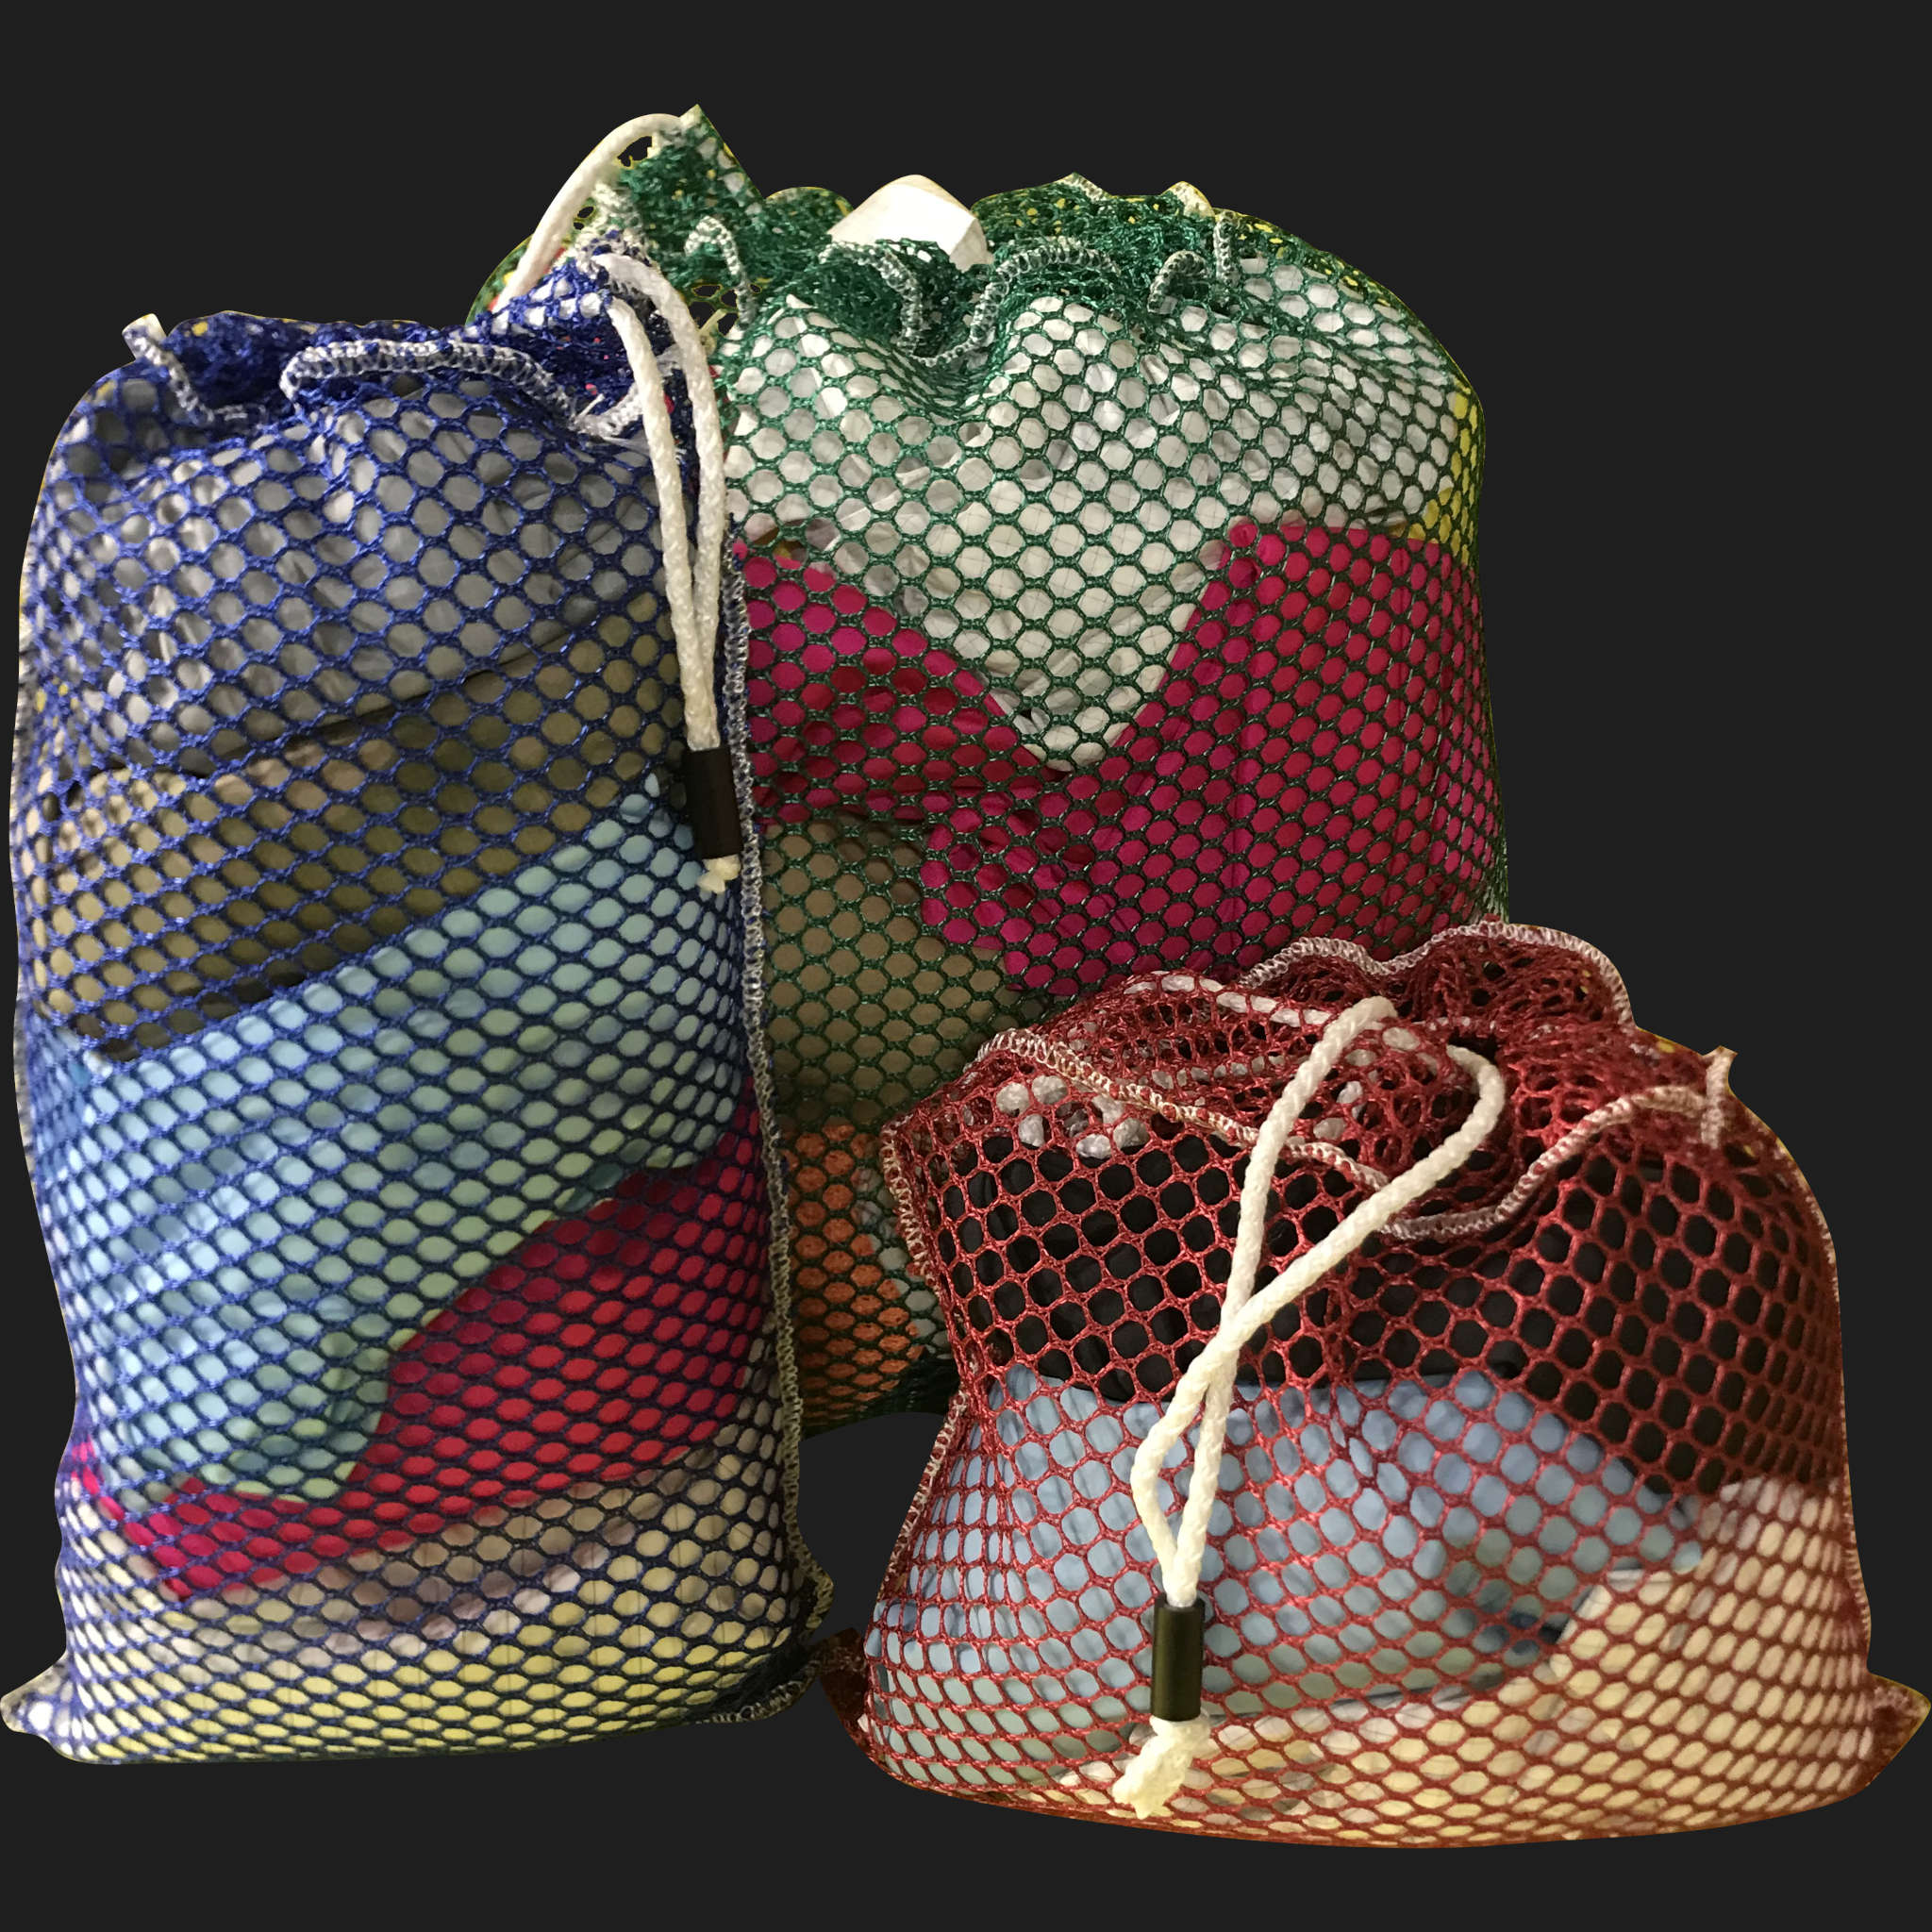 44" x 66" Customized Mesh-Net-Laundry Bags Heavy Duty with Cord and barrellock closure